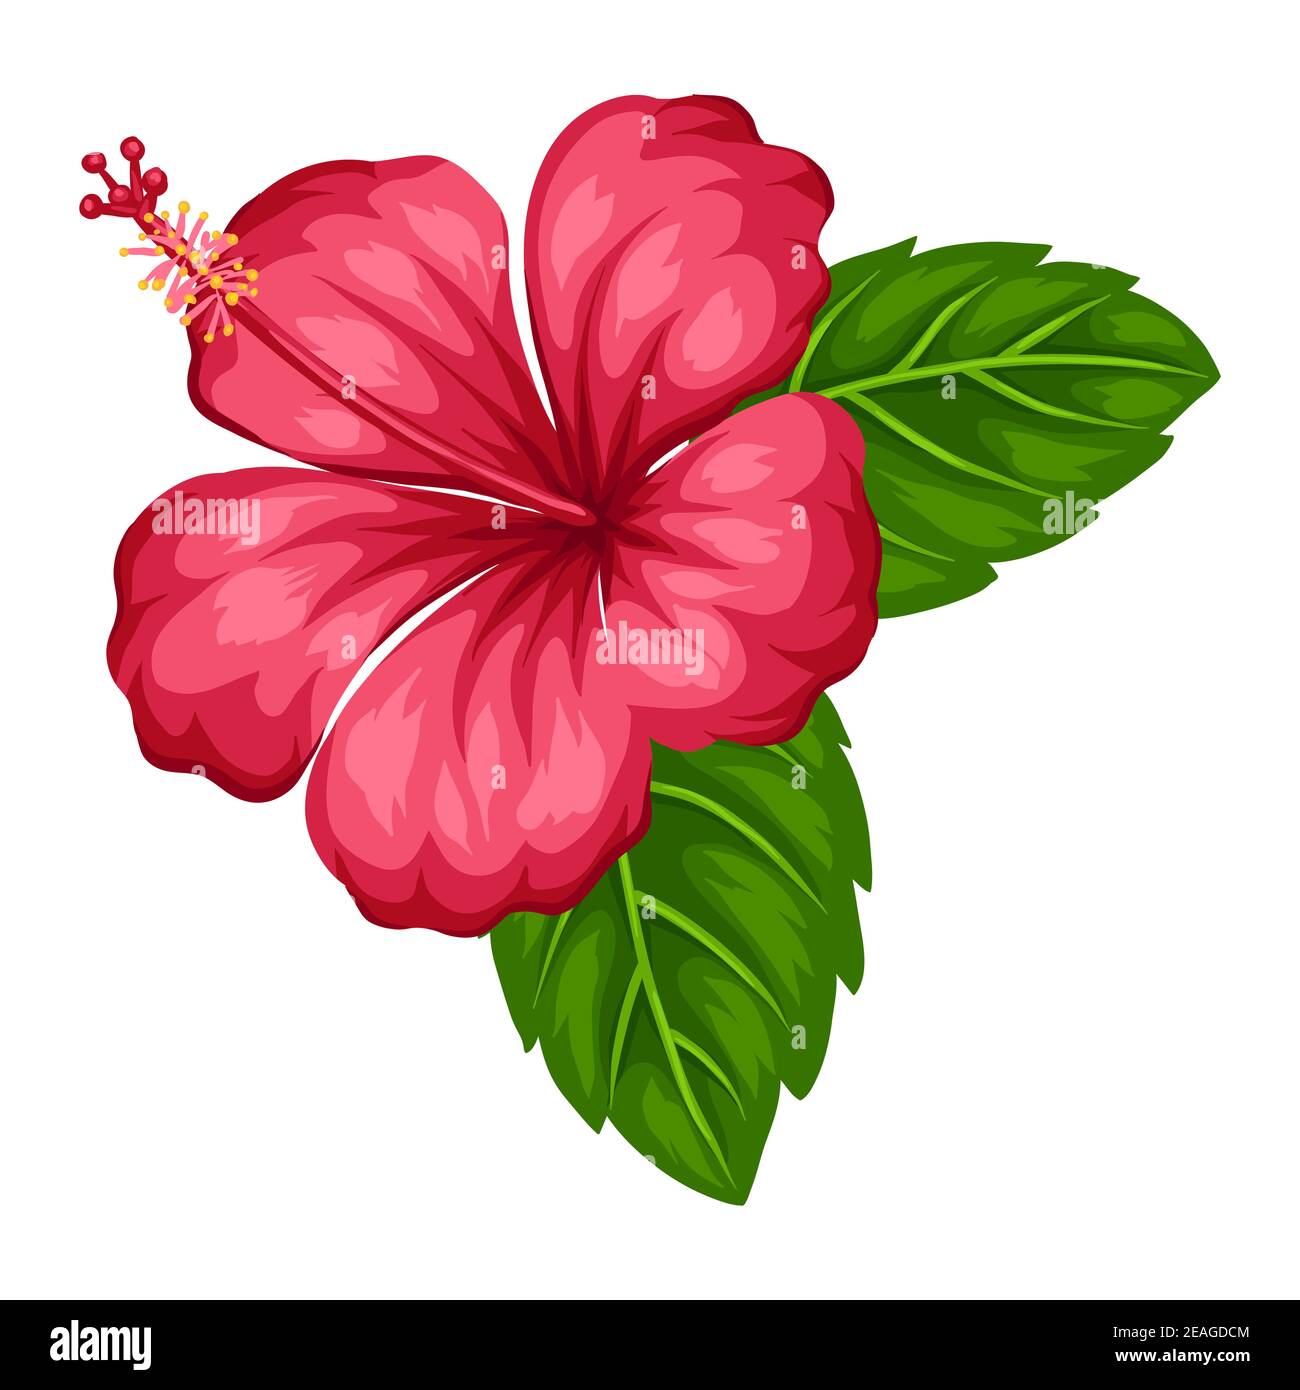 Illustration of tropical hibiscus flower. Stock Vector